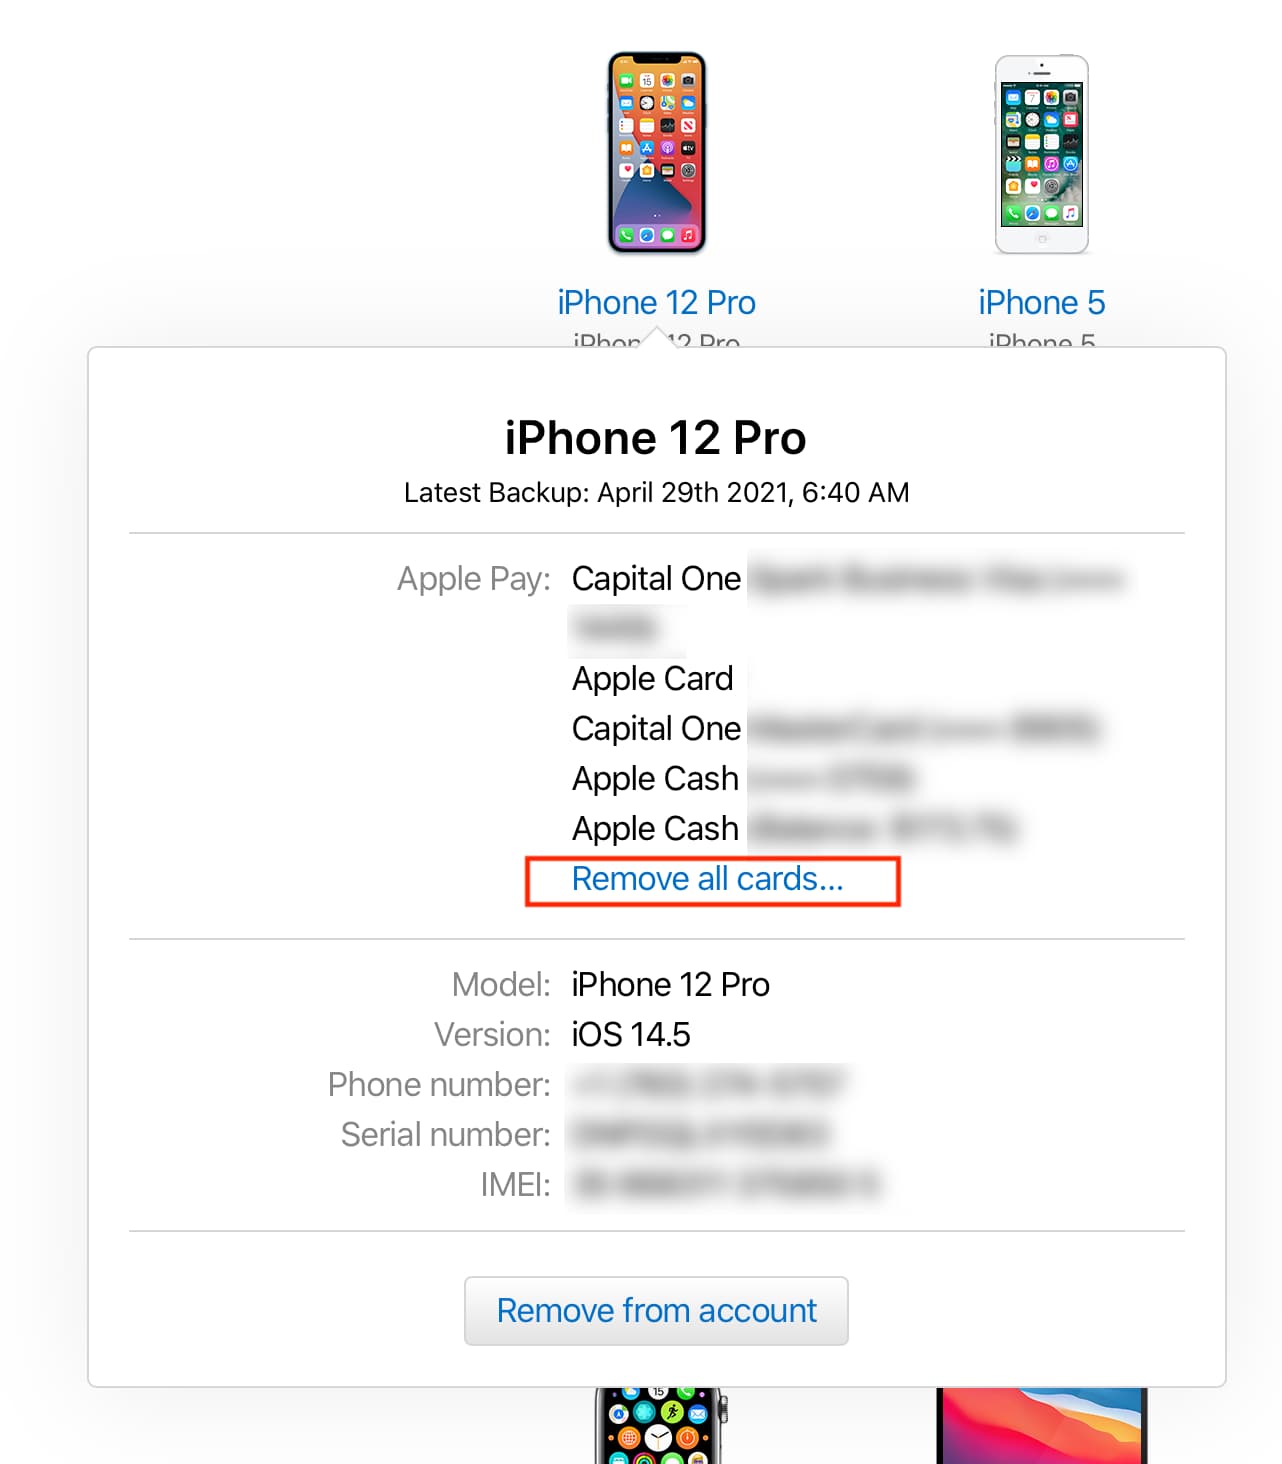 Remove cards from device on iCloud